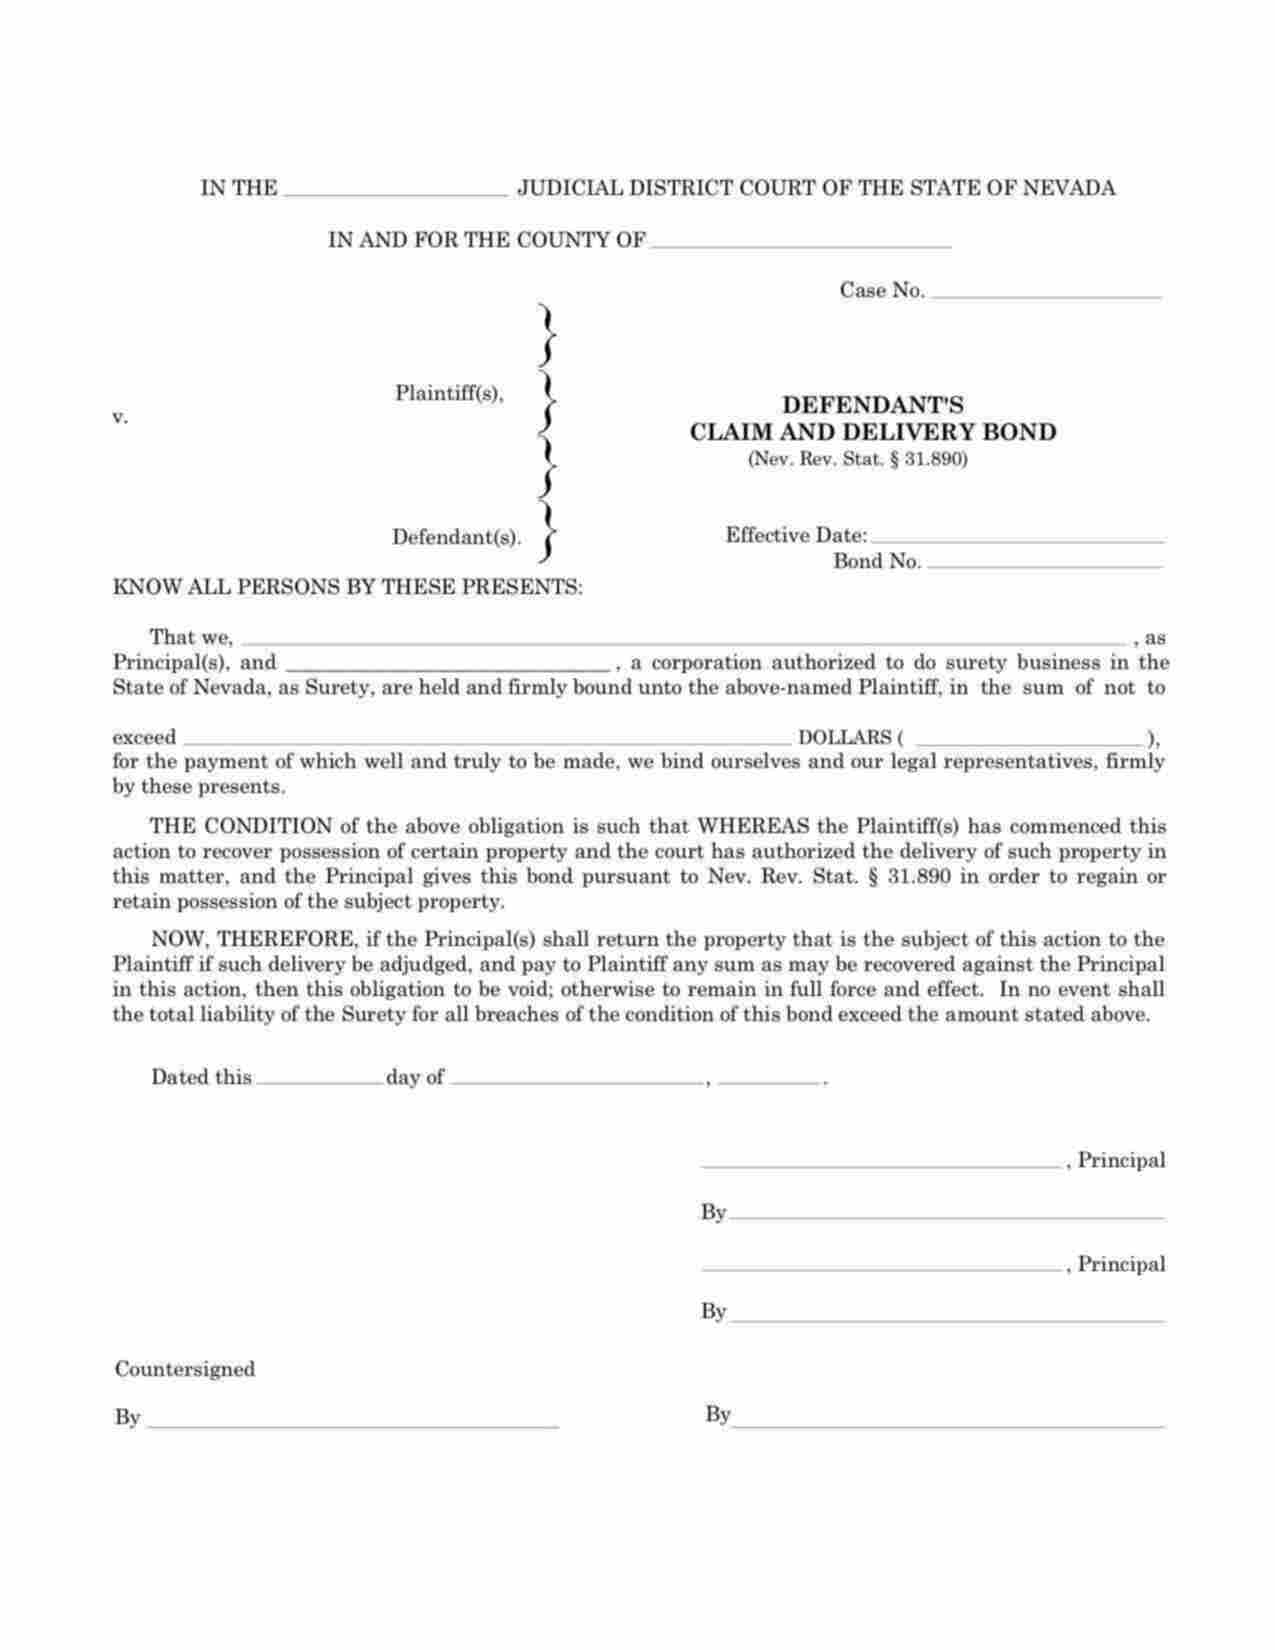 Nevada Defendants Claim and Delivery Bond Form